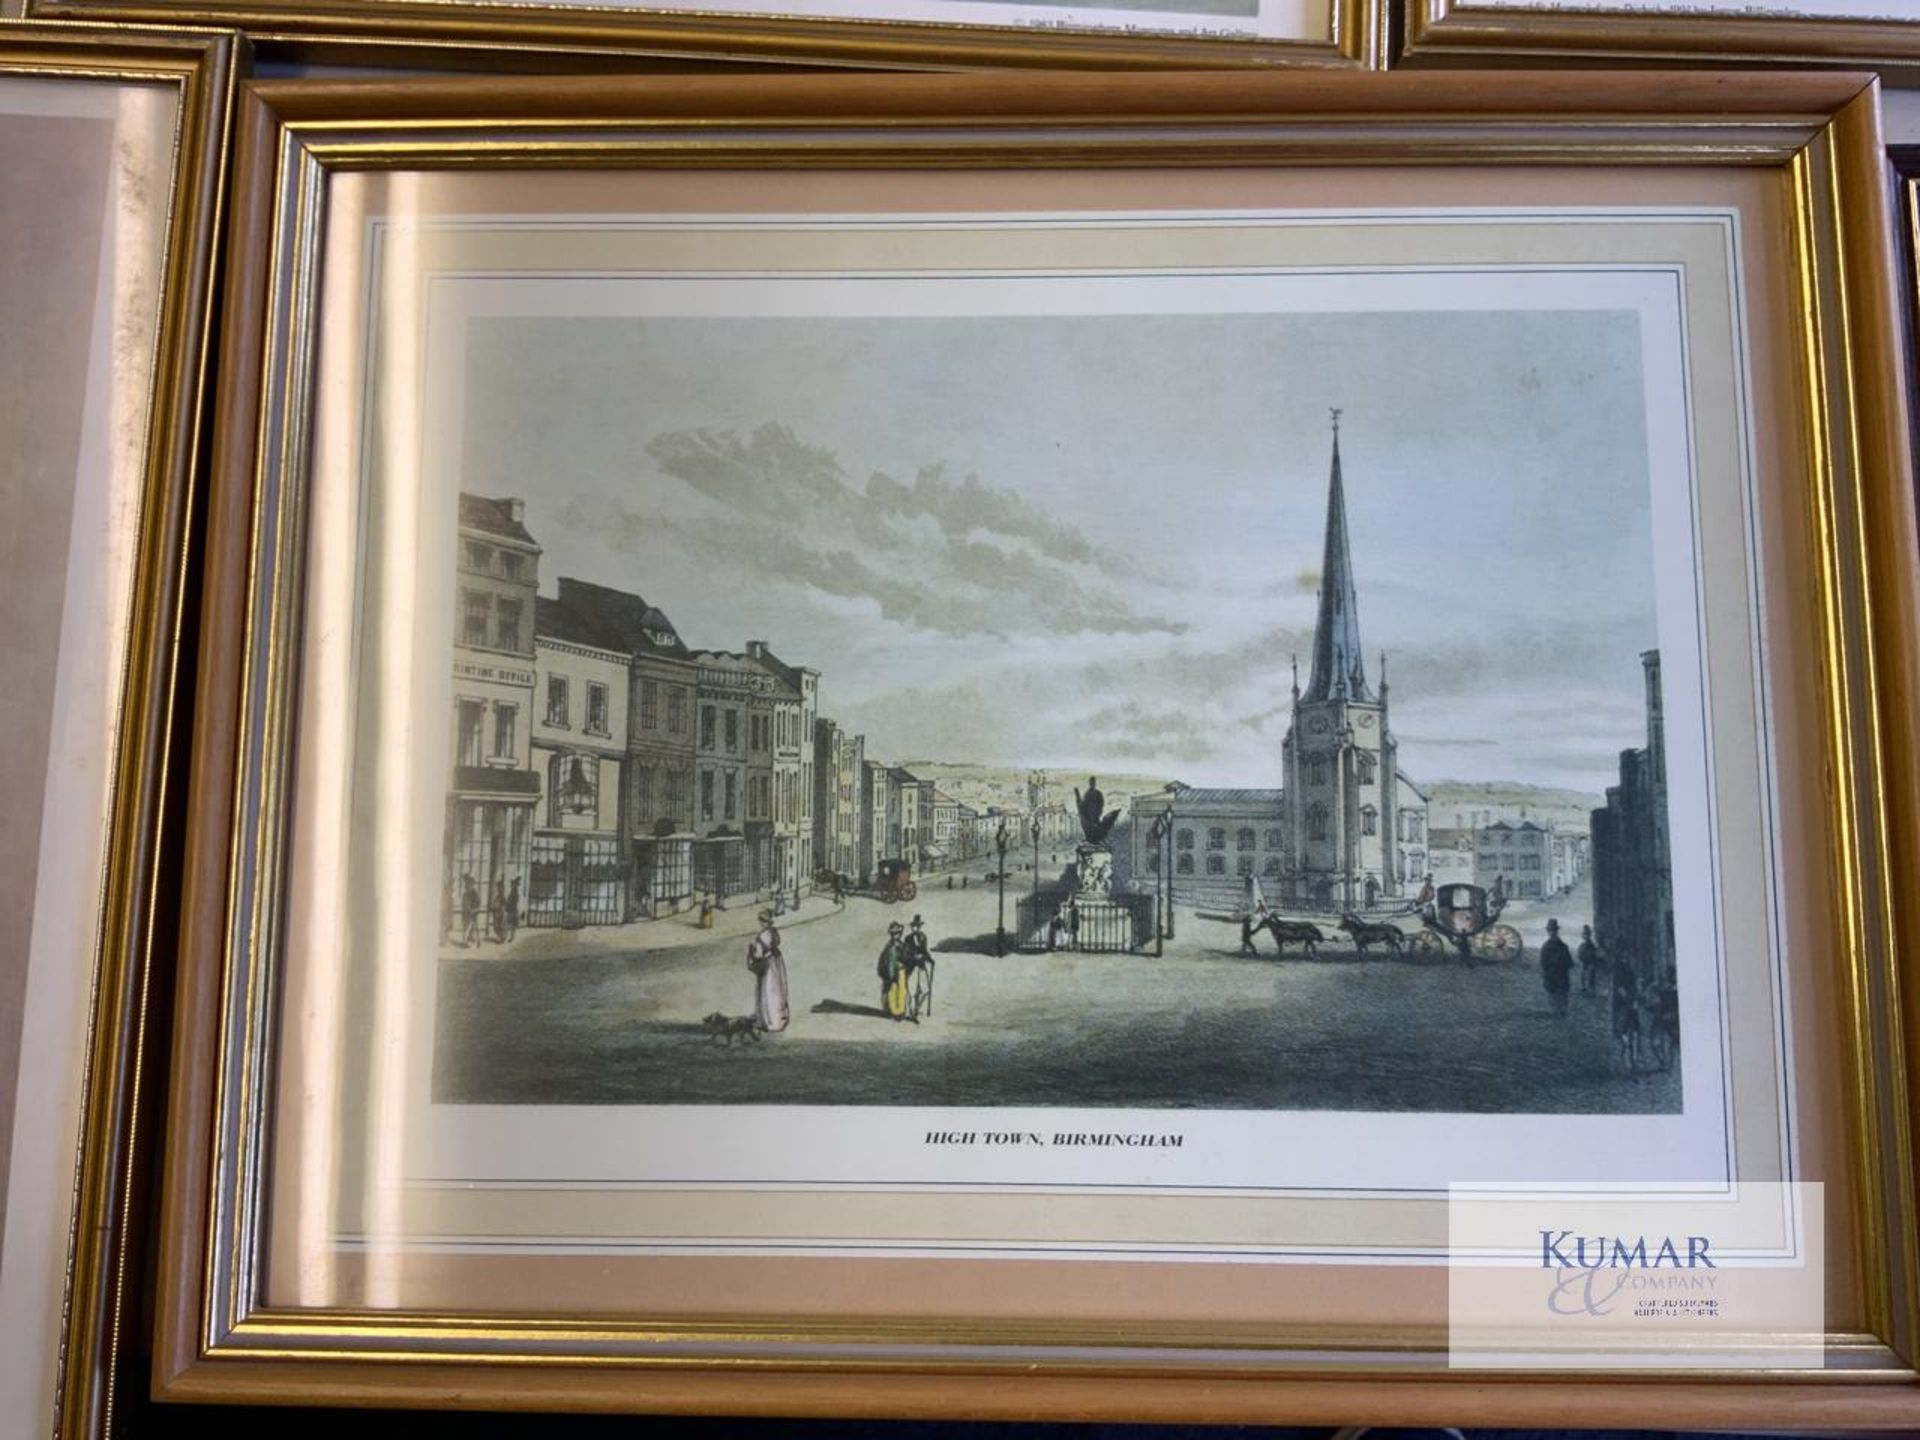 23: Various Pictures, Paintings, Drawings Etc - As Shown Many Historic Images of Birmingham by James - Image 9 of 26